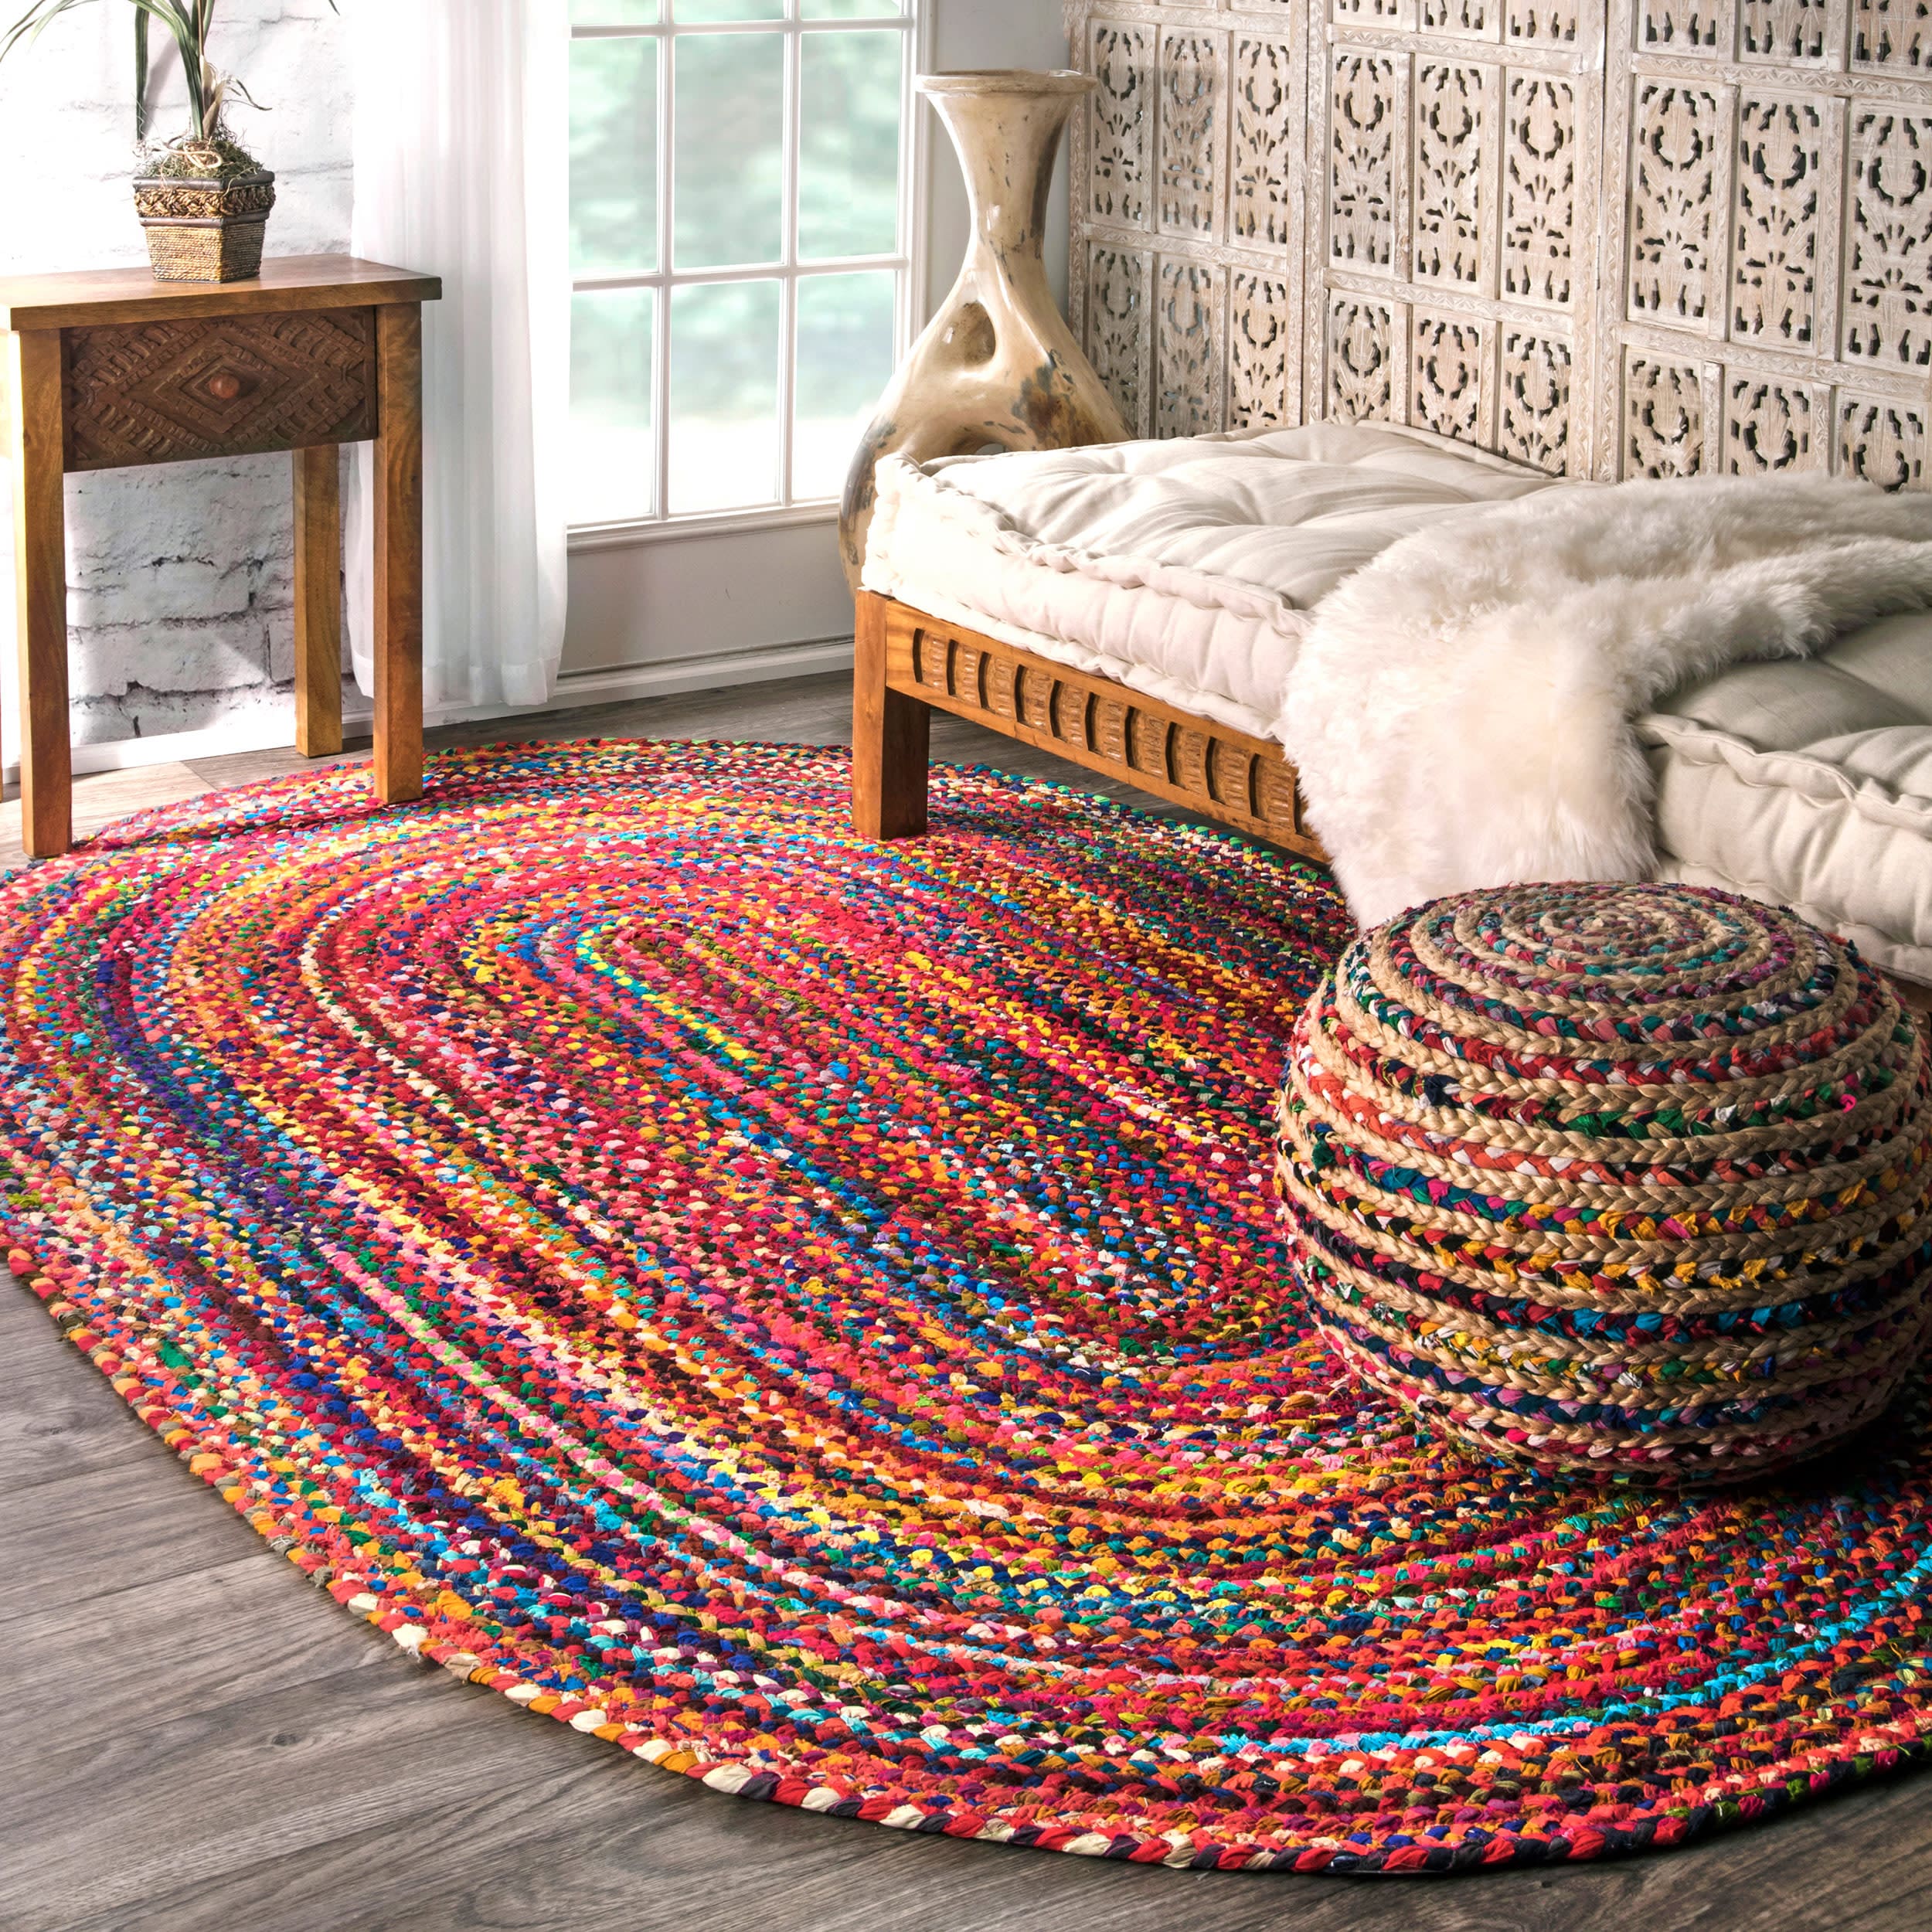 Braided Rugs Oval 8x12